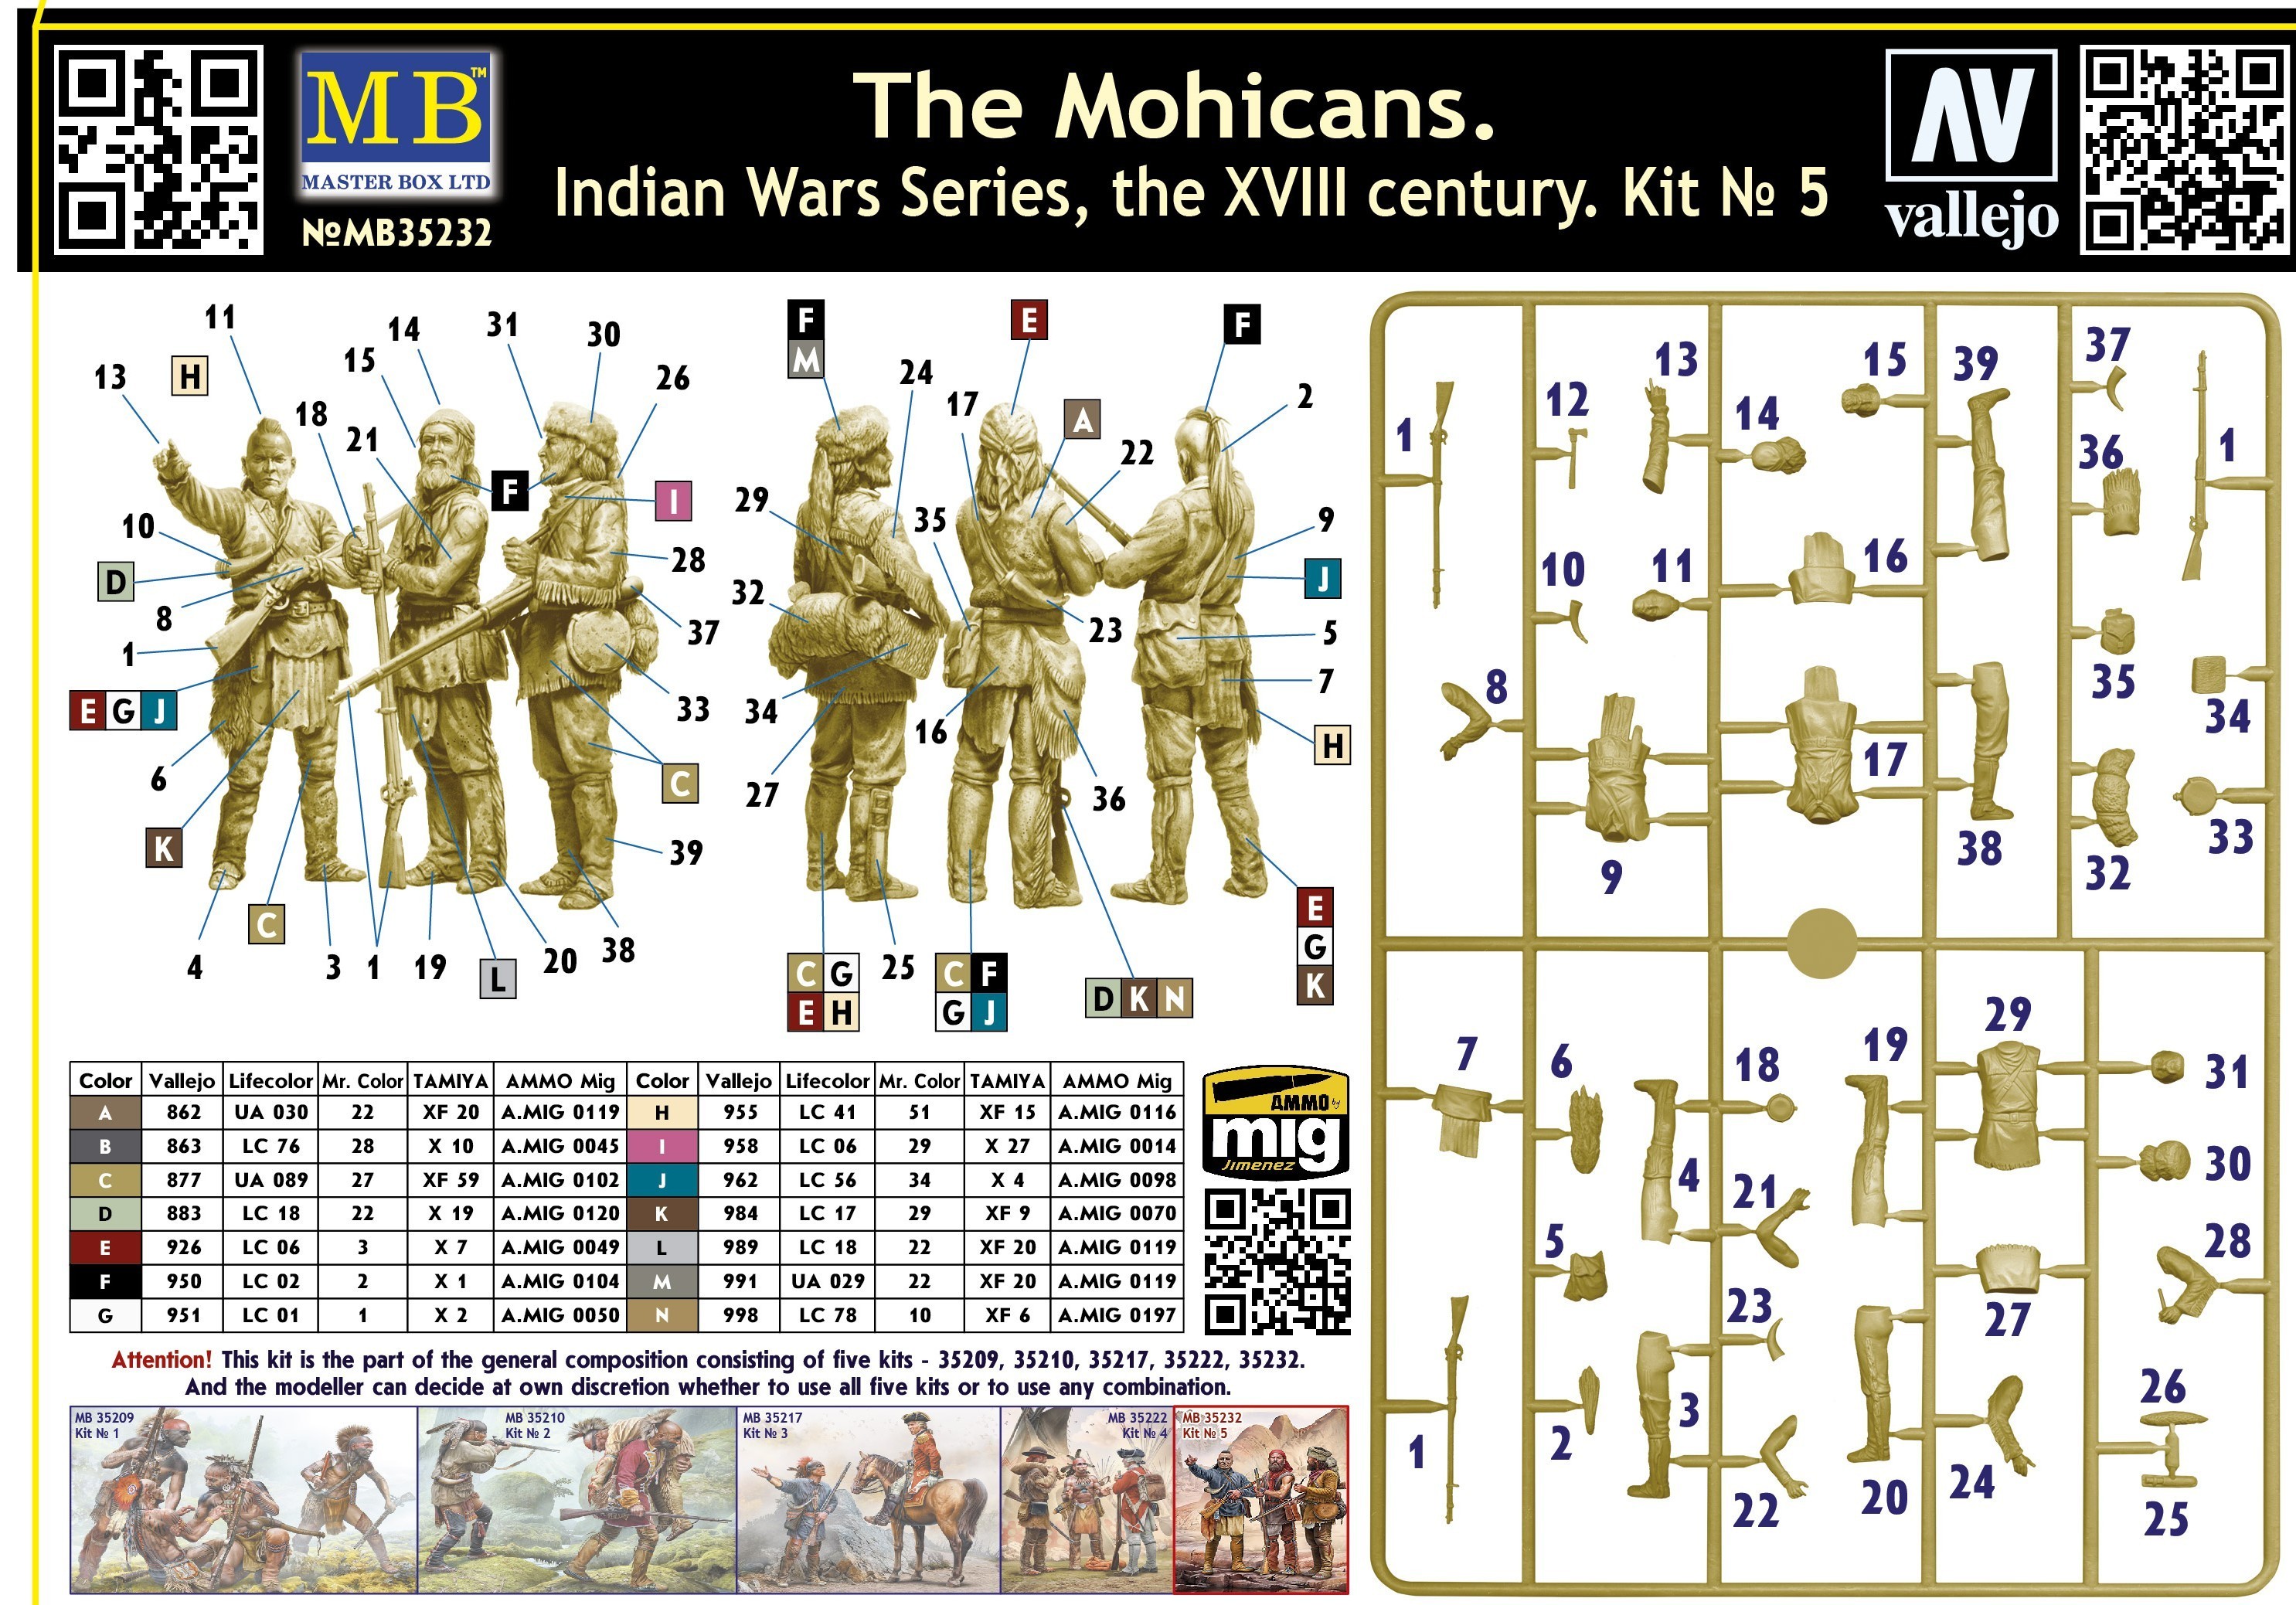 "The Mohicans. Indian Wars Series, the XVIII century. Kit No 5" -  1/35 scale kit Sprue